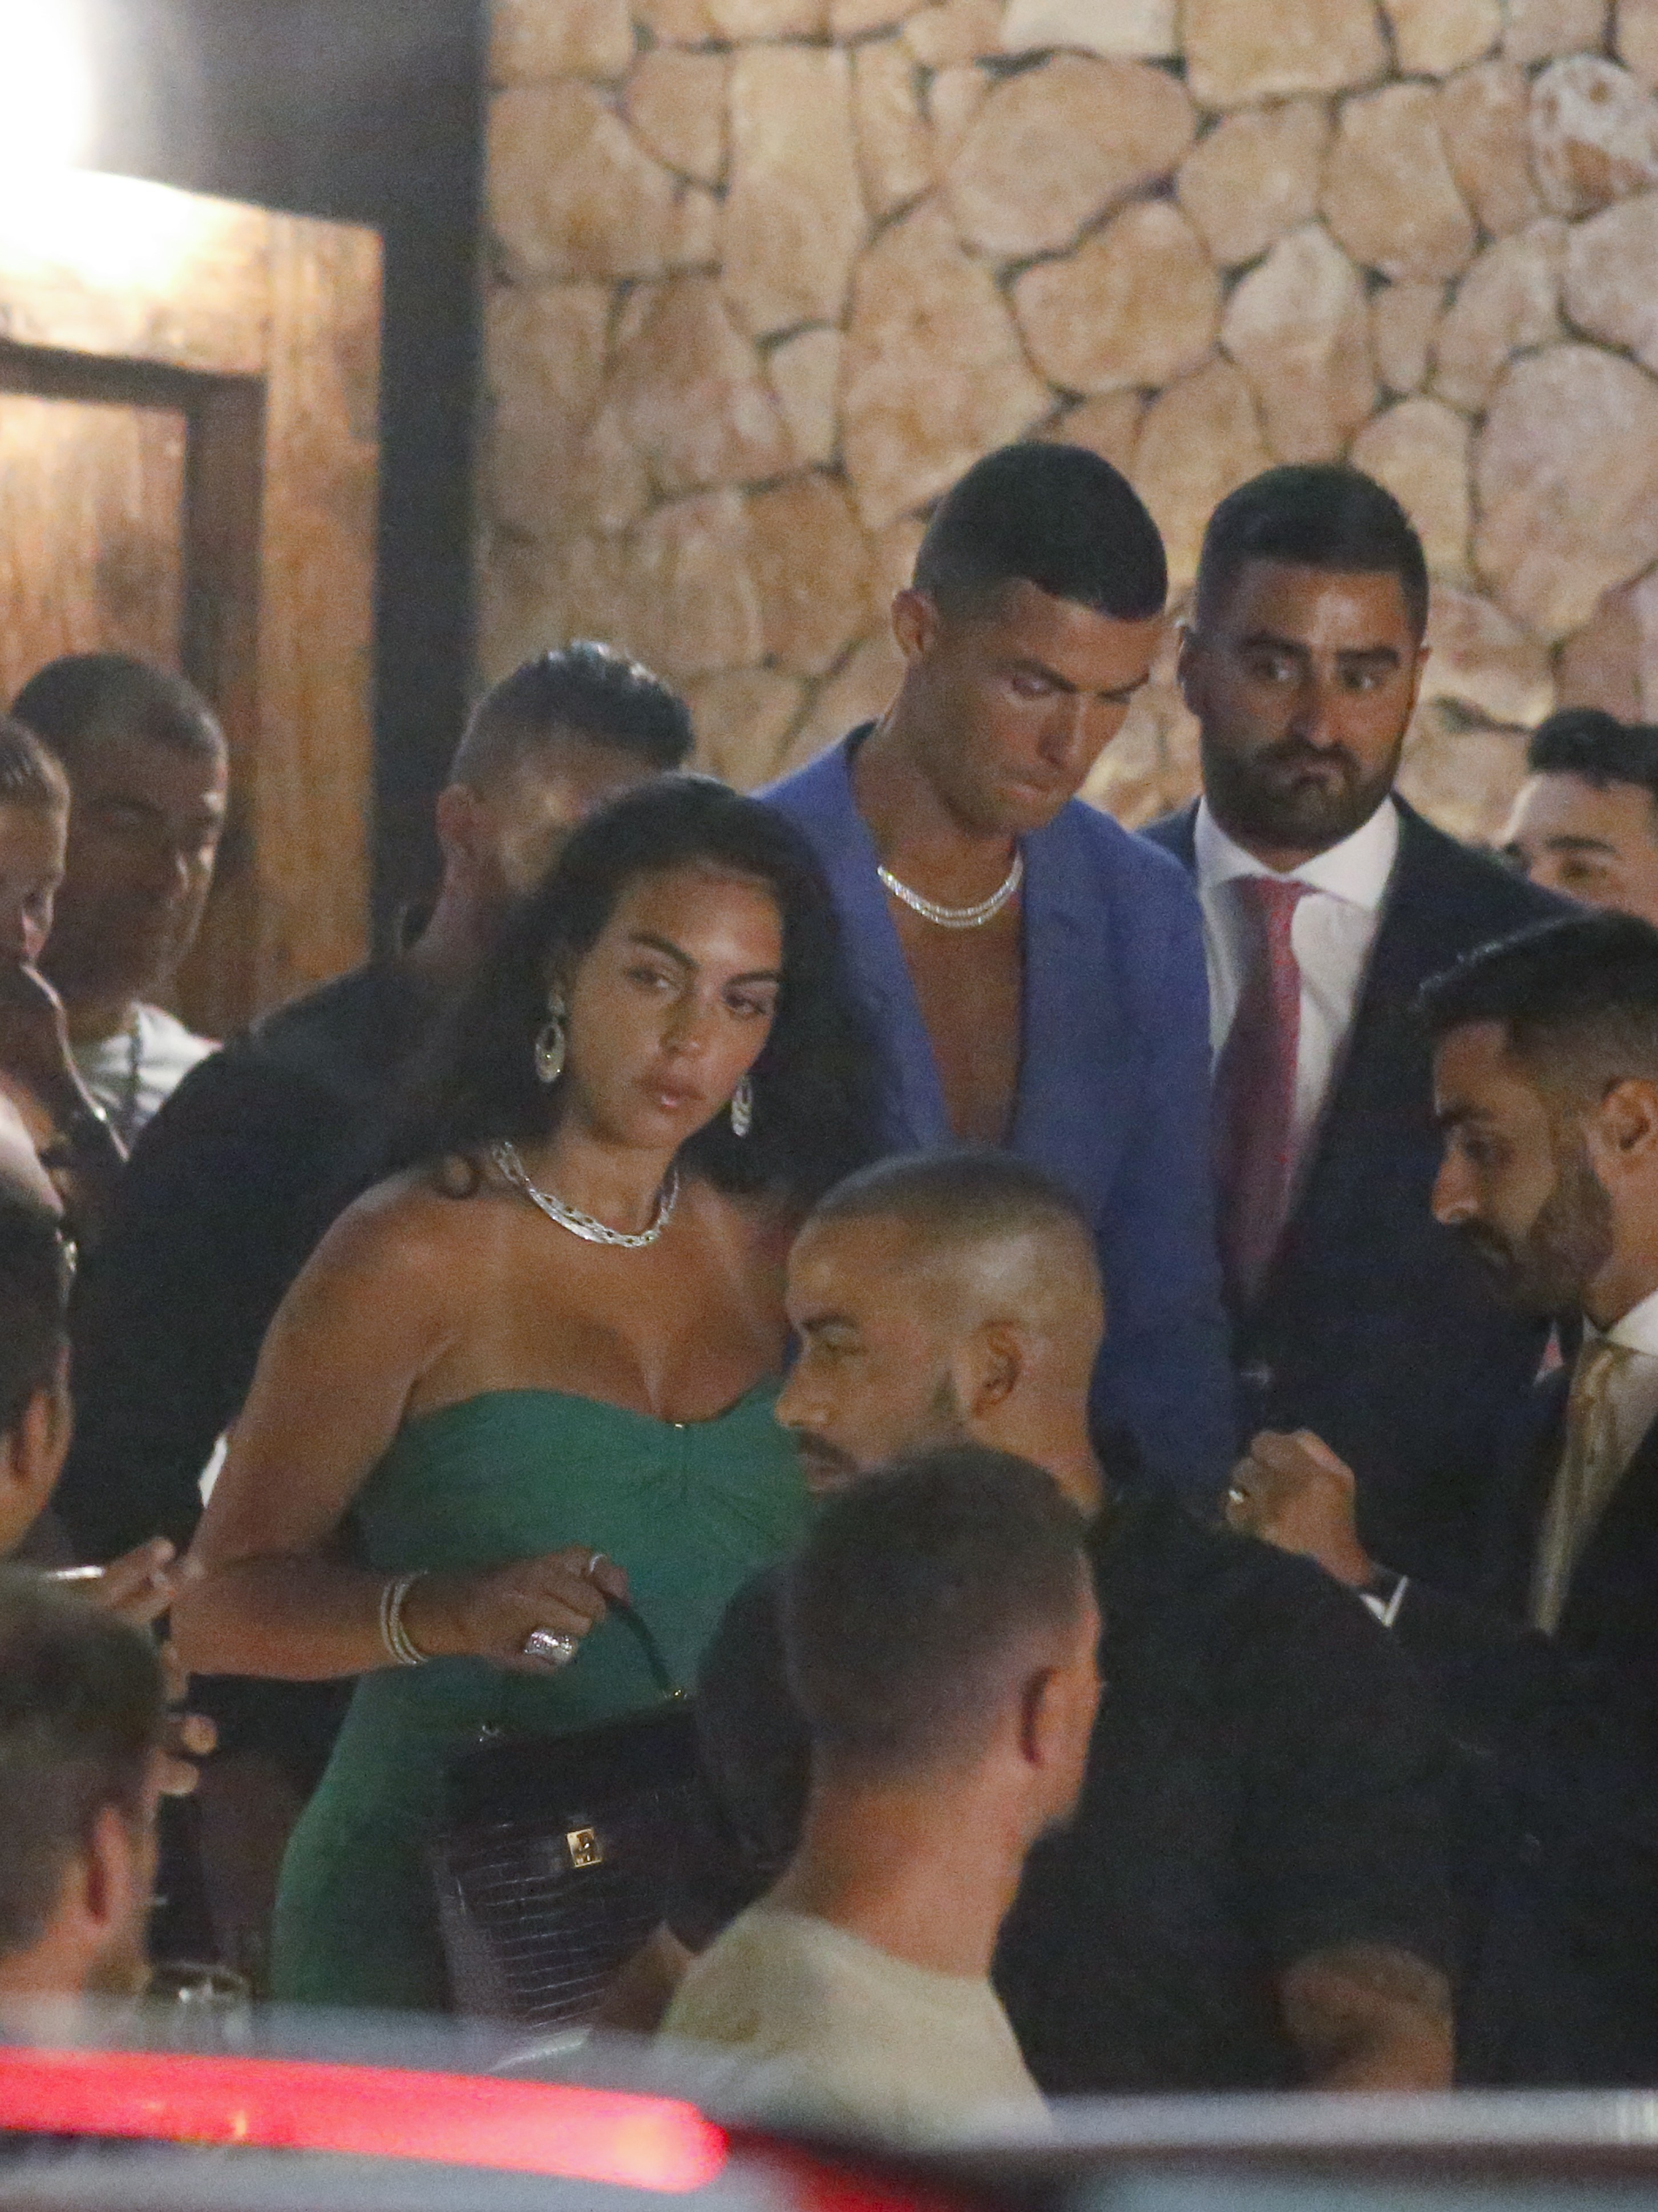 Fun night.  Cristiano Ronaldo and Georgina Rodríguez were photographed when they left a private event in Ibiza, where they enjoy a few days of vacation.  The athlete wore a blue suit without a shirt or shirt, and his partner opted for a strapless green dress with a heart cut